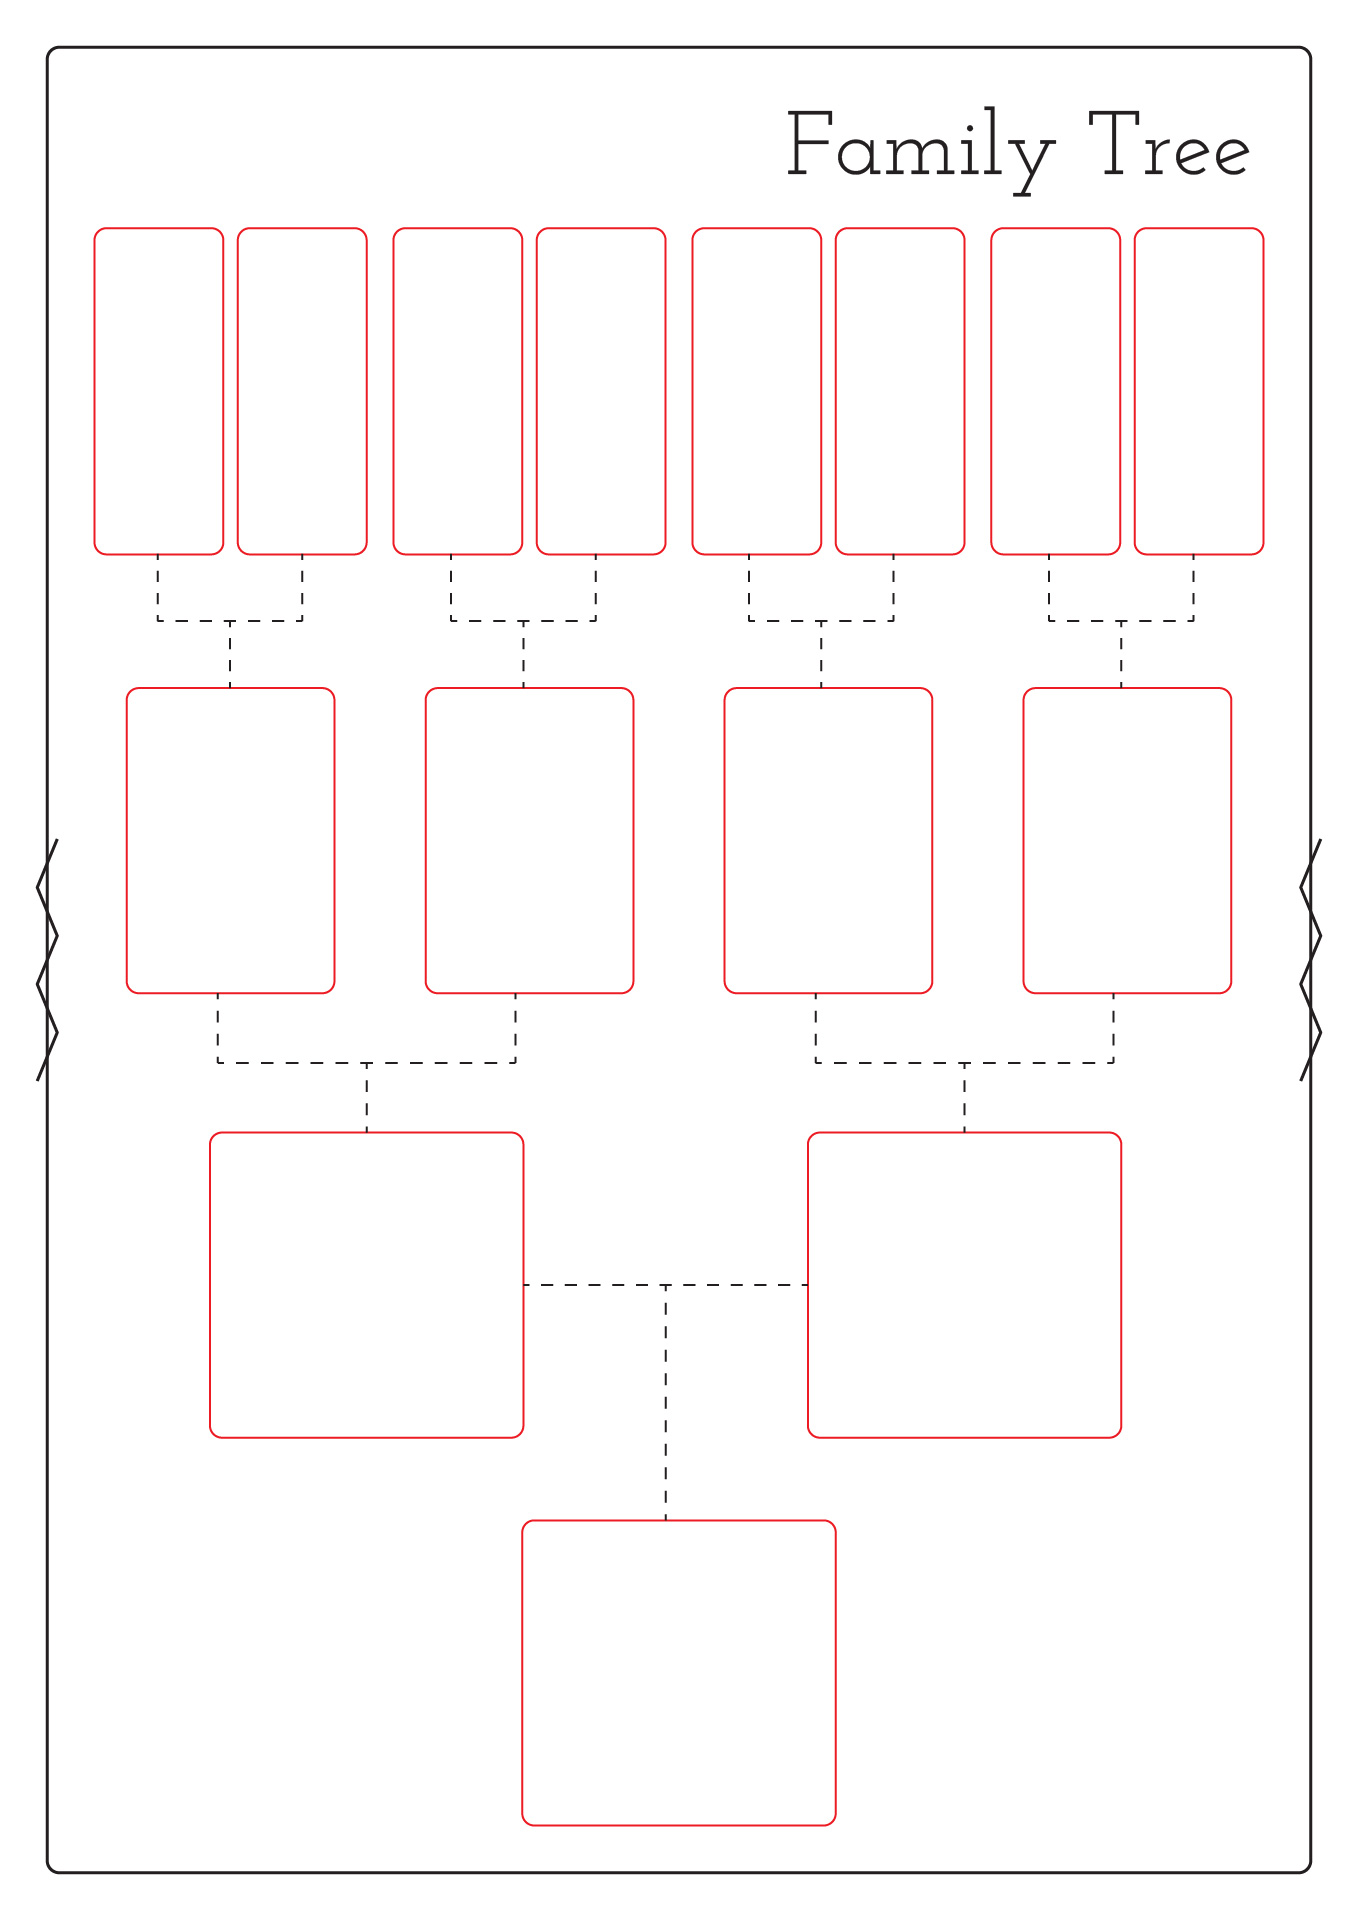 Free Family Tree Template Word